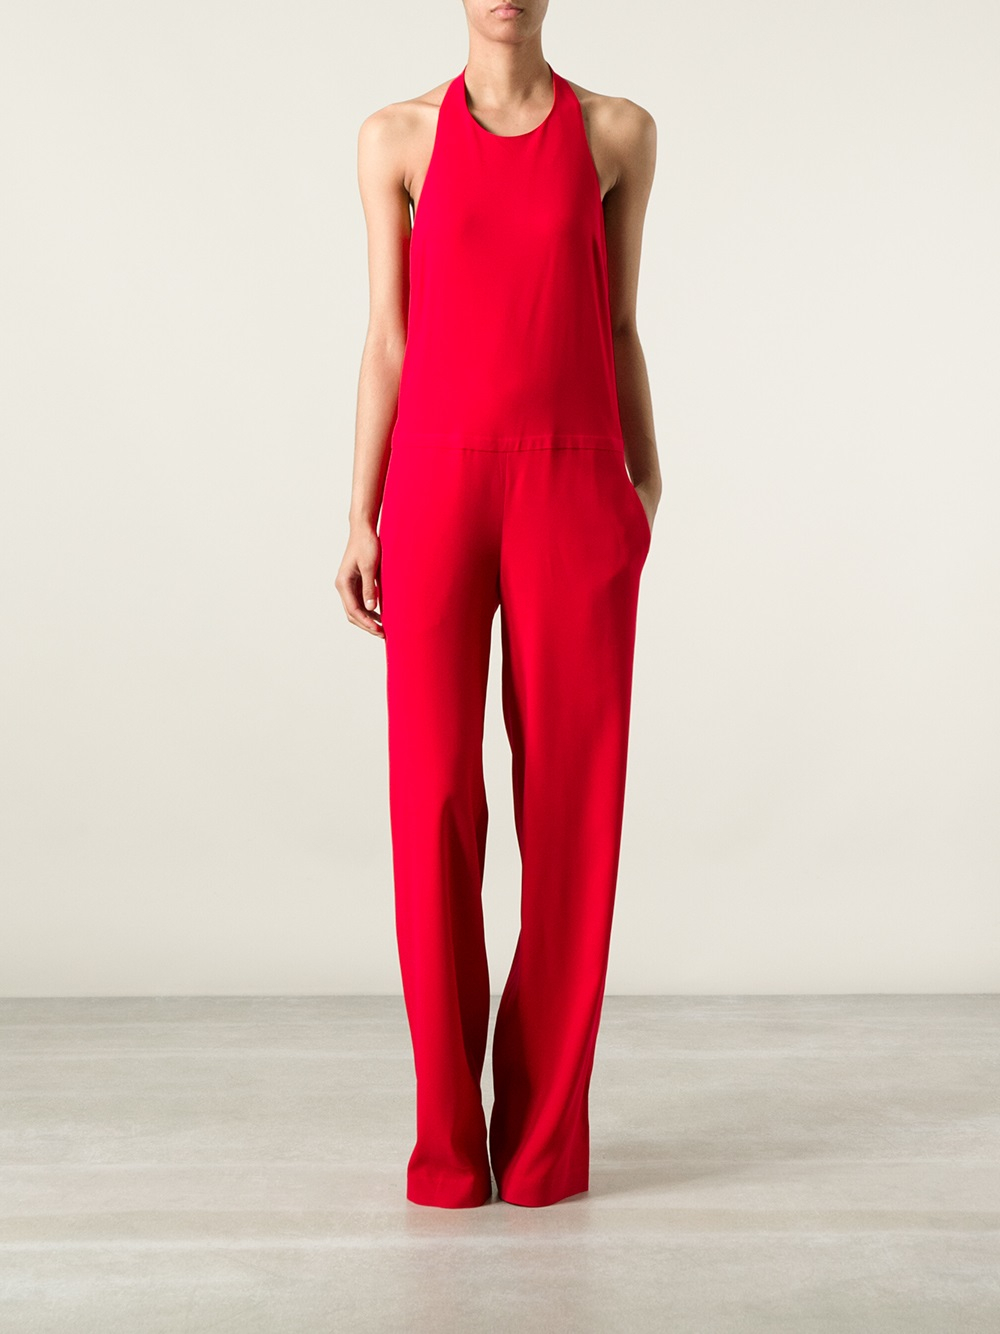 Lyst - Normaluisa Sleeveless Jumpsuit in Red